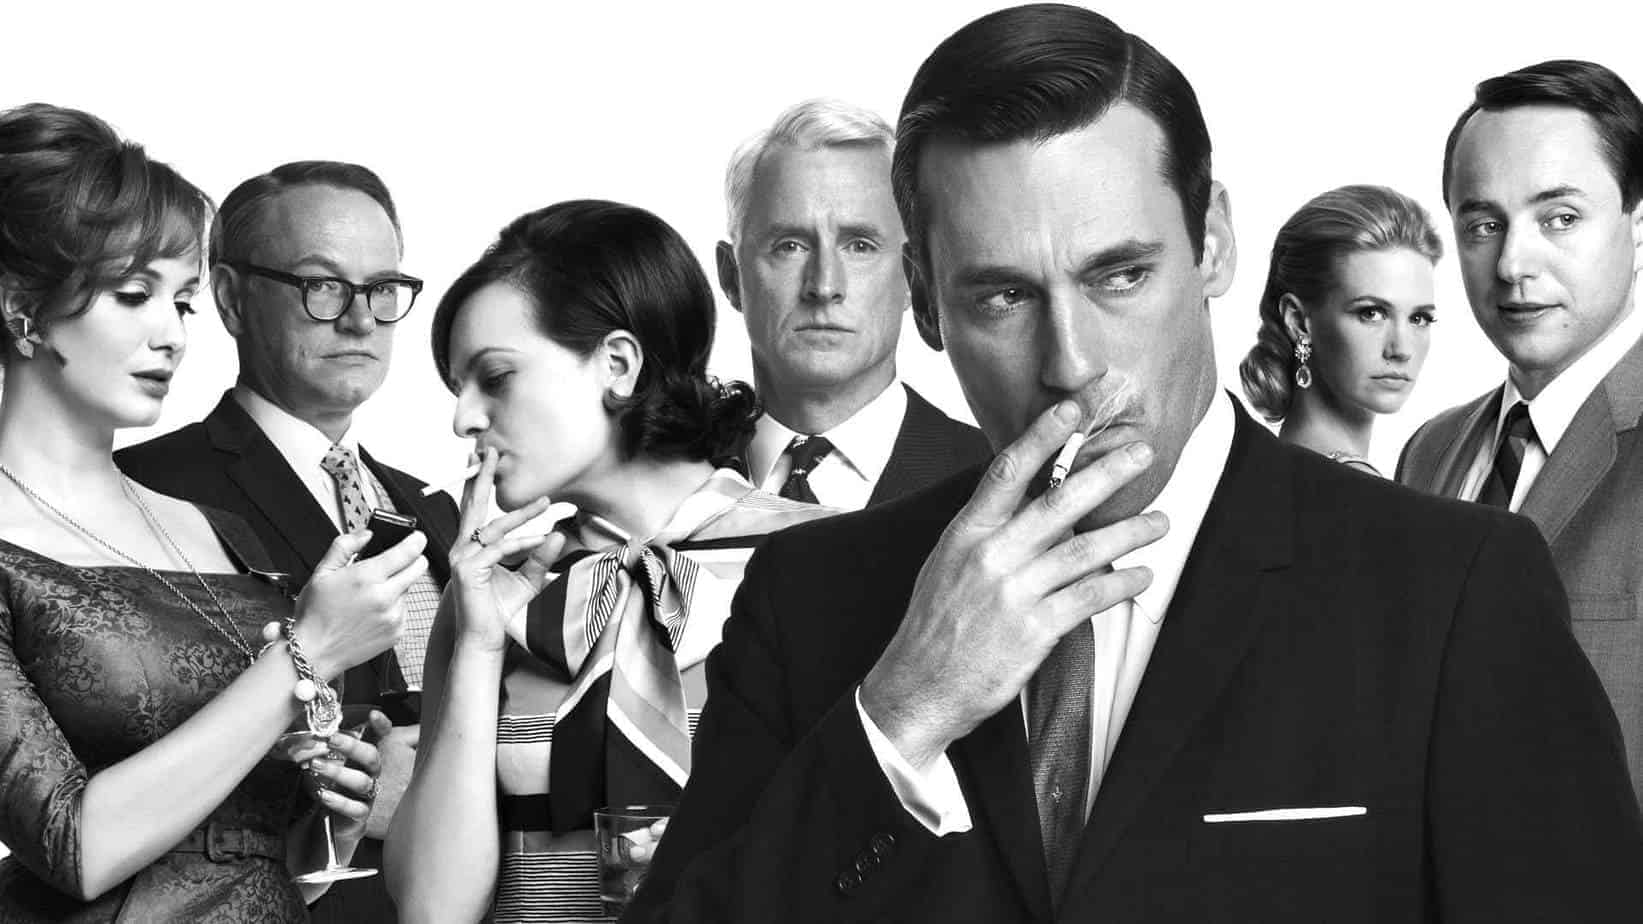 image of the mad men cast lighting cigarettes or standing nearby